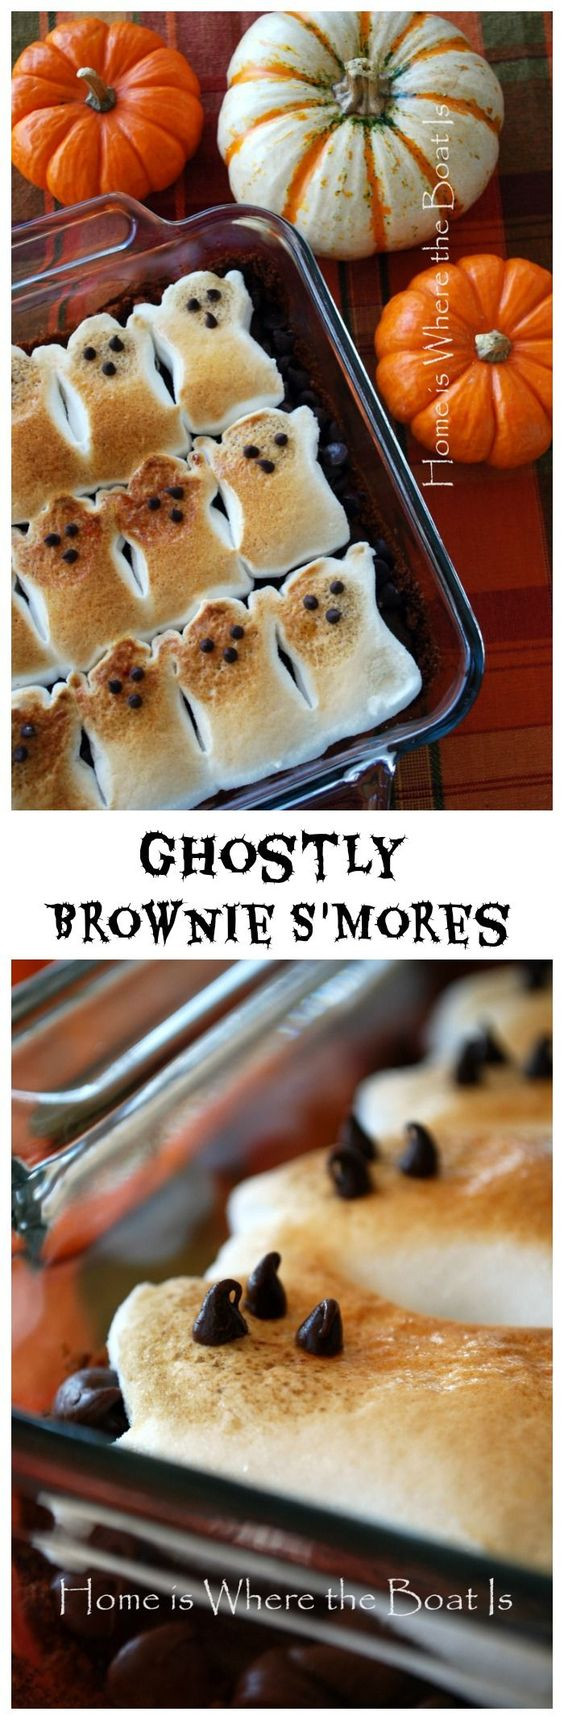 Halloween Party Desserts
 The BEST Halloween Party Recipes Spooktacular Desserts